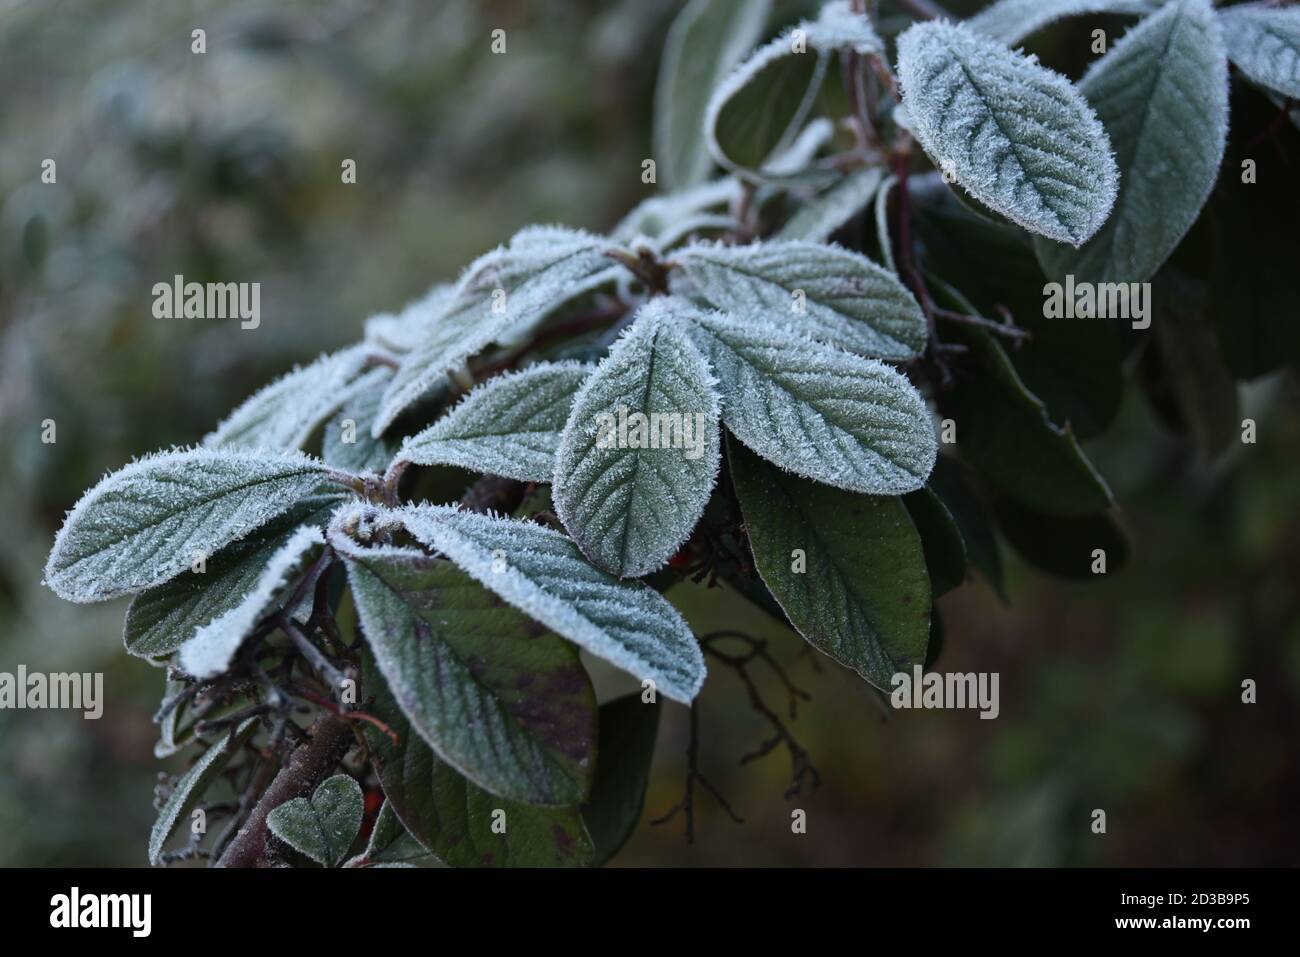 Ice on leaves, Stock Photo